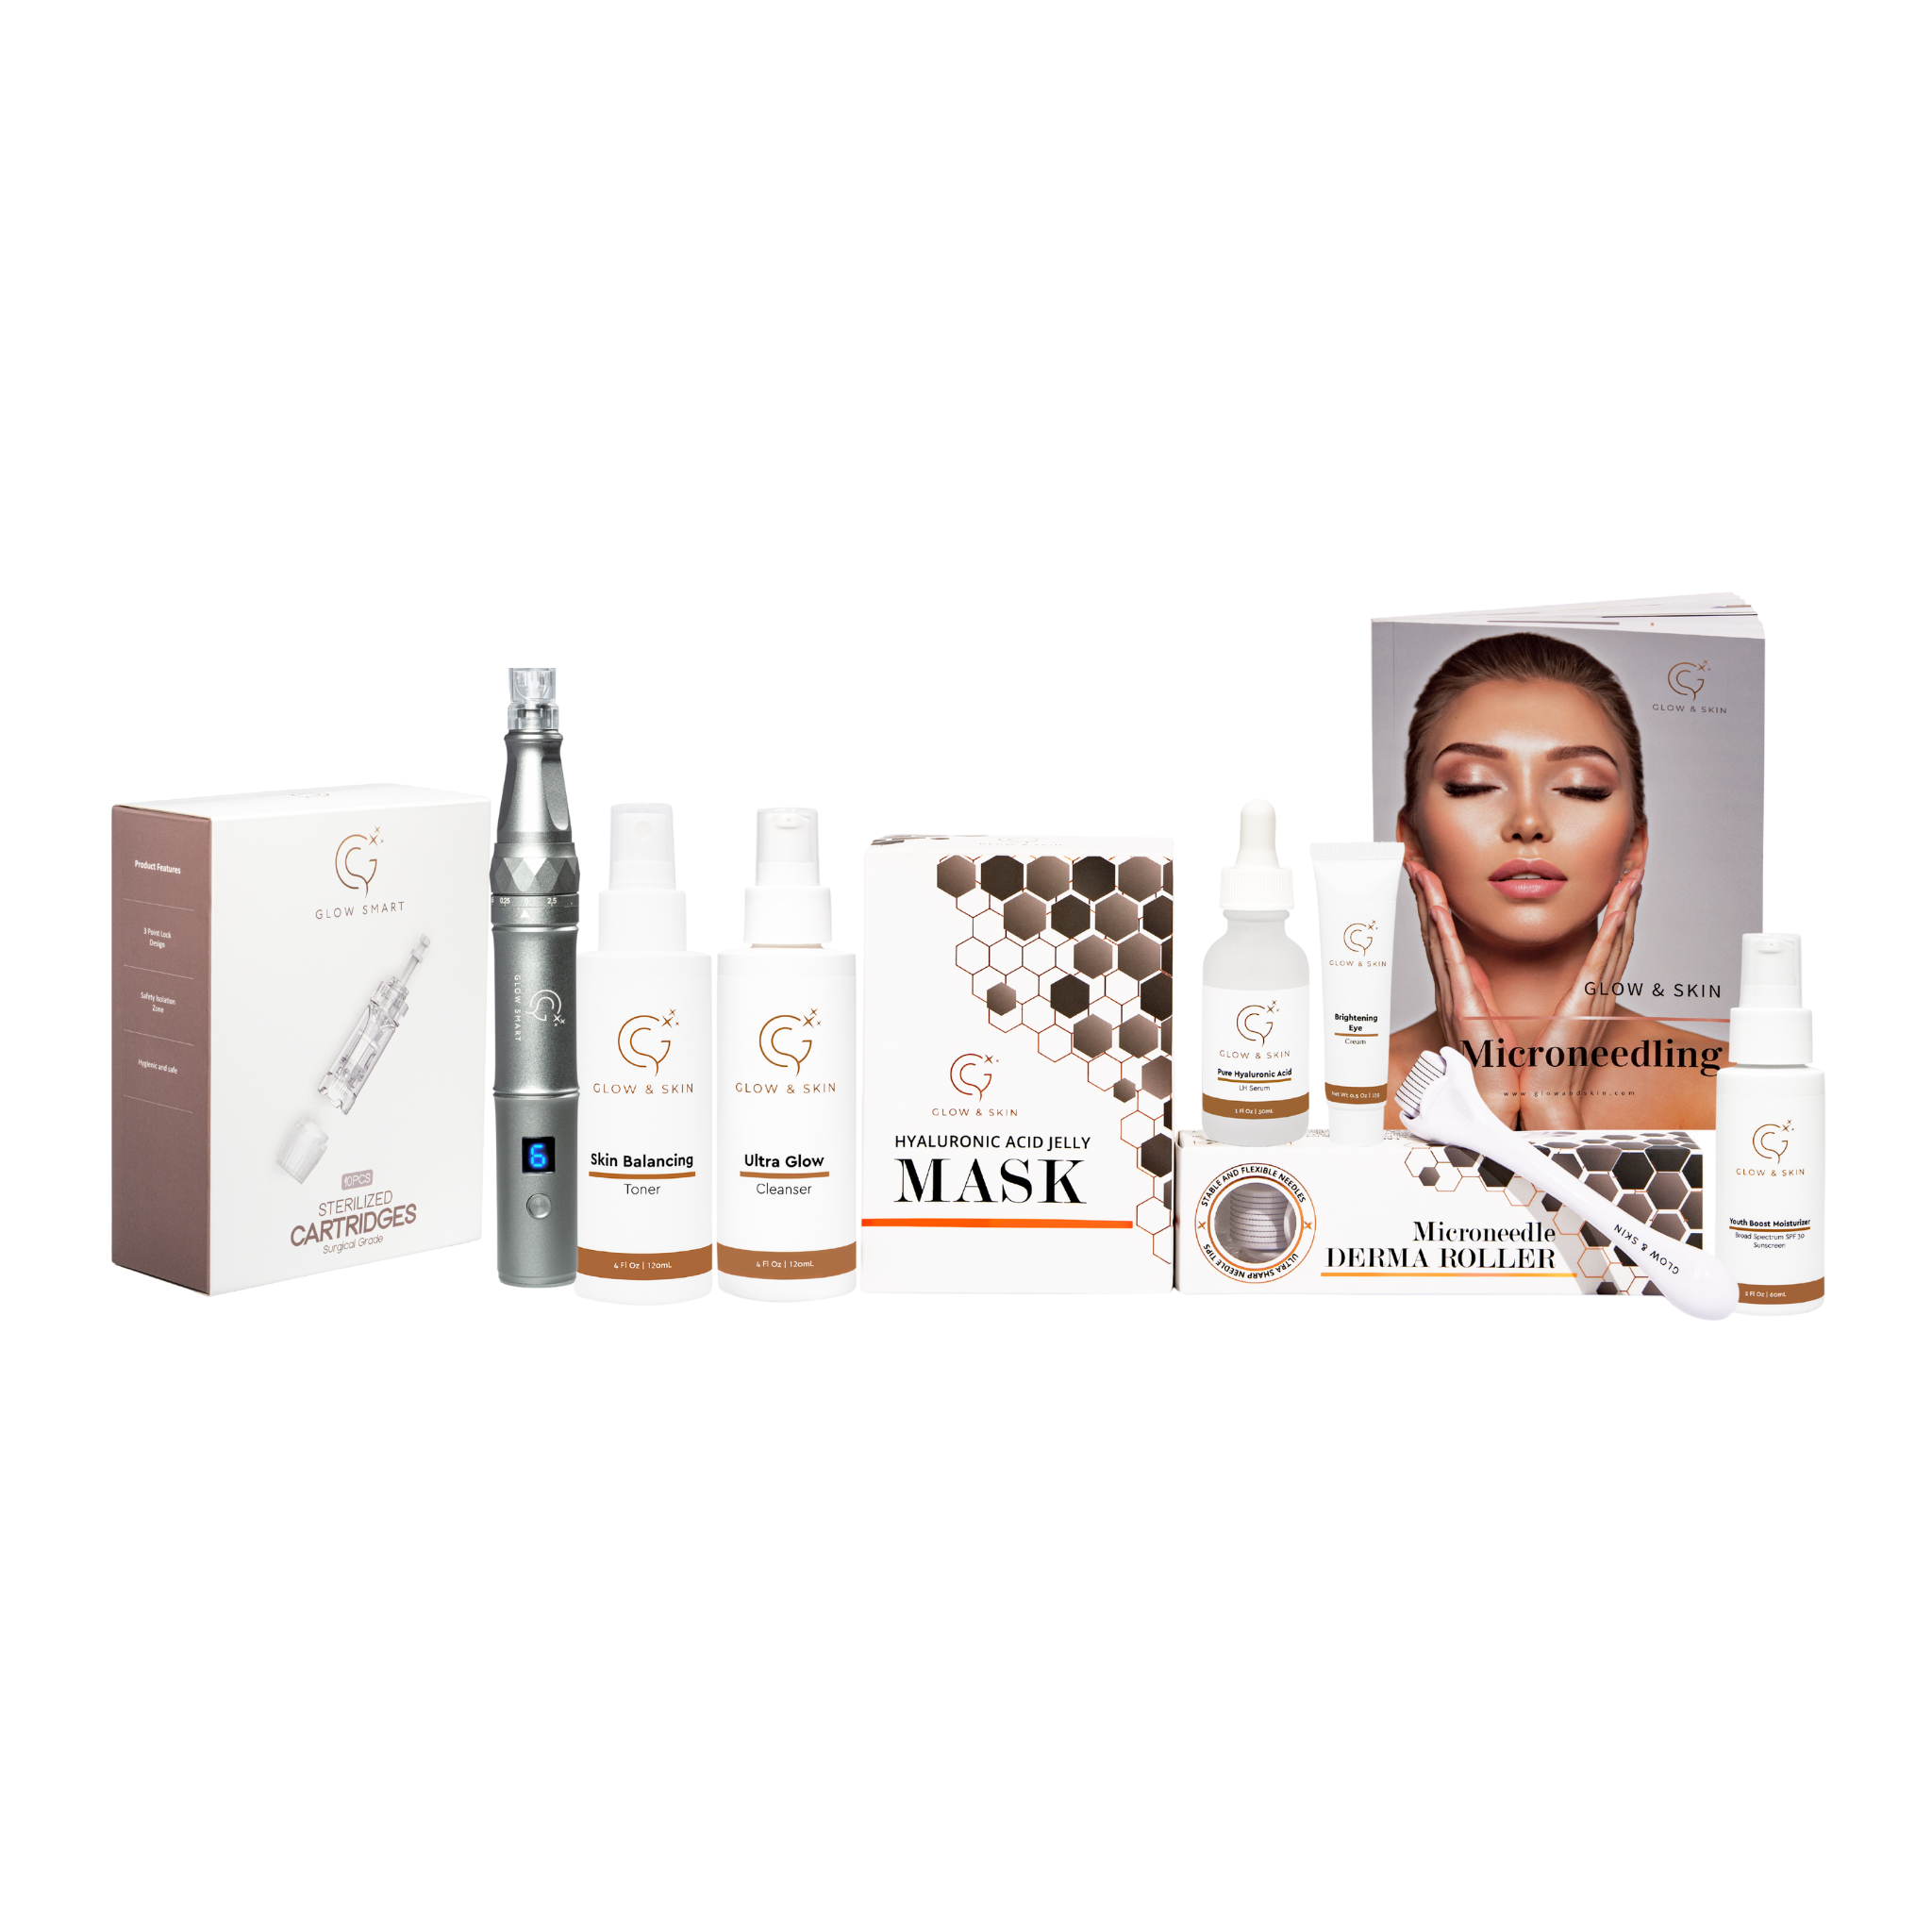 microneedling kit for professionals and salons